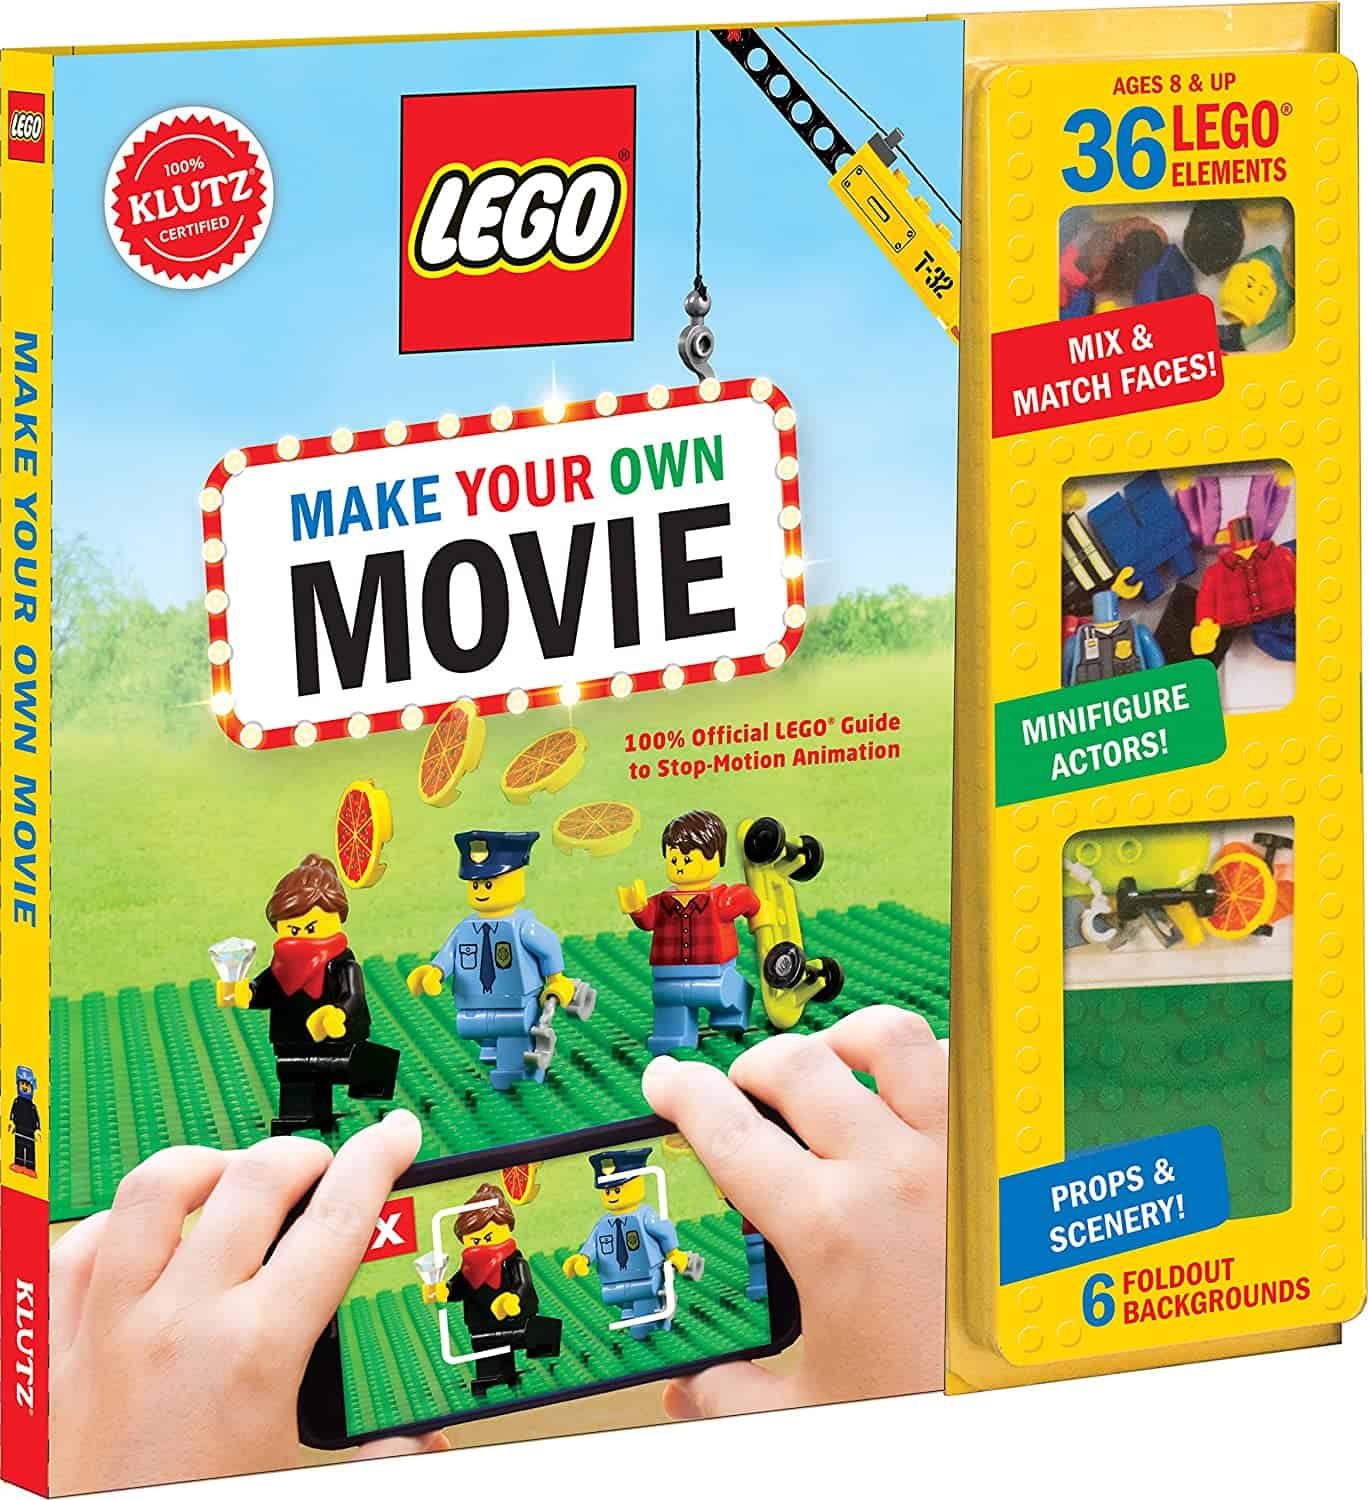 Best stop motion kit for brickfilm (LEGO)- Klutz Lego Make Your Own Movie